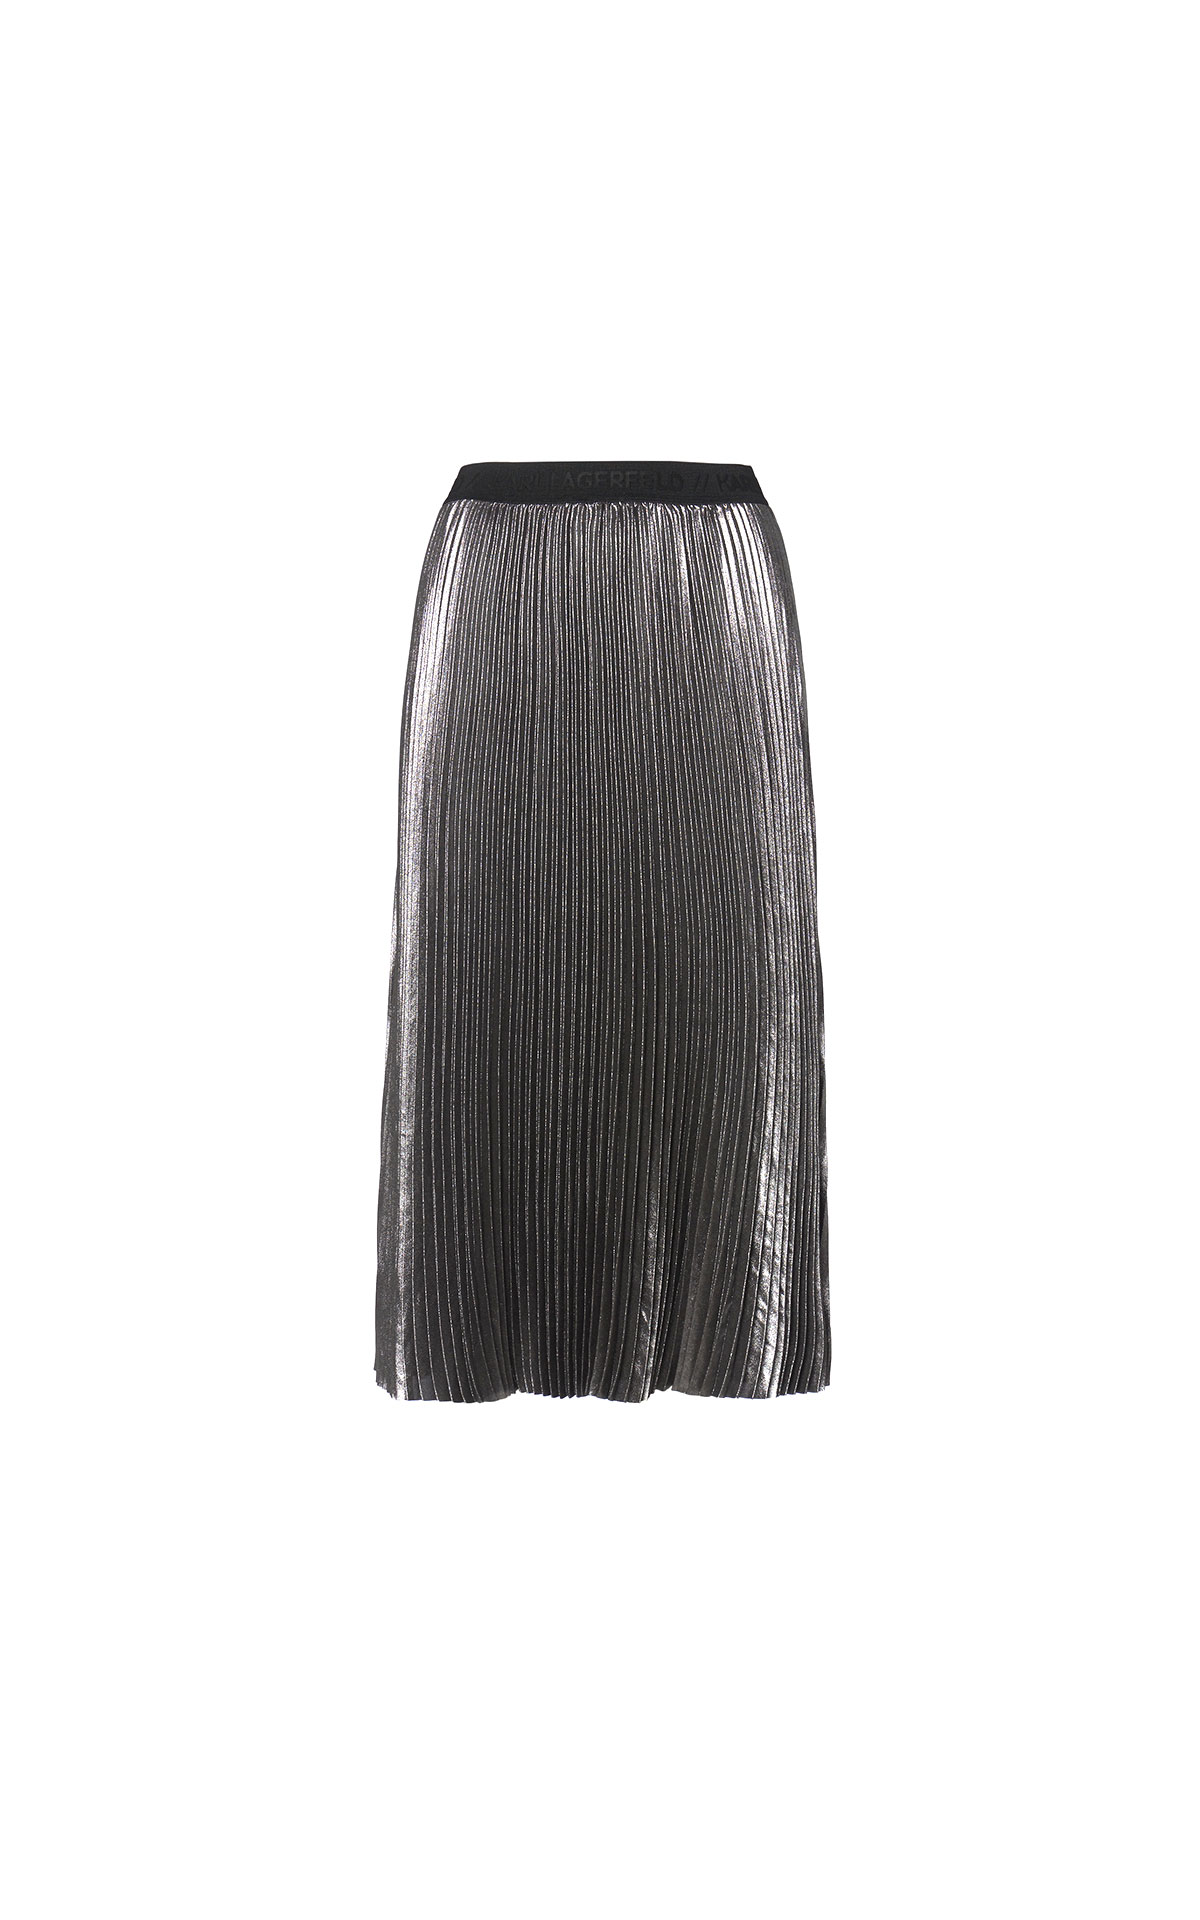 Karl Lagerfeld athleisure pleated skirt at The Bicester Village Shopping Collection